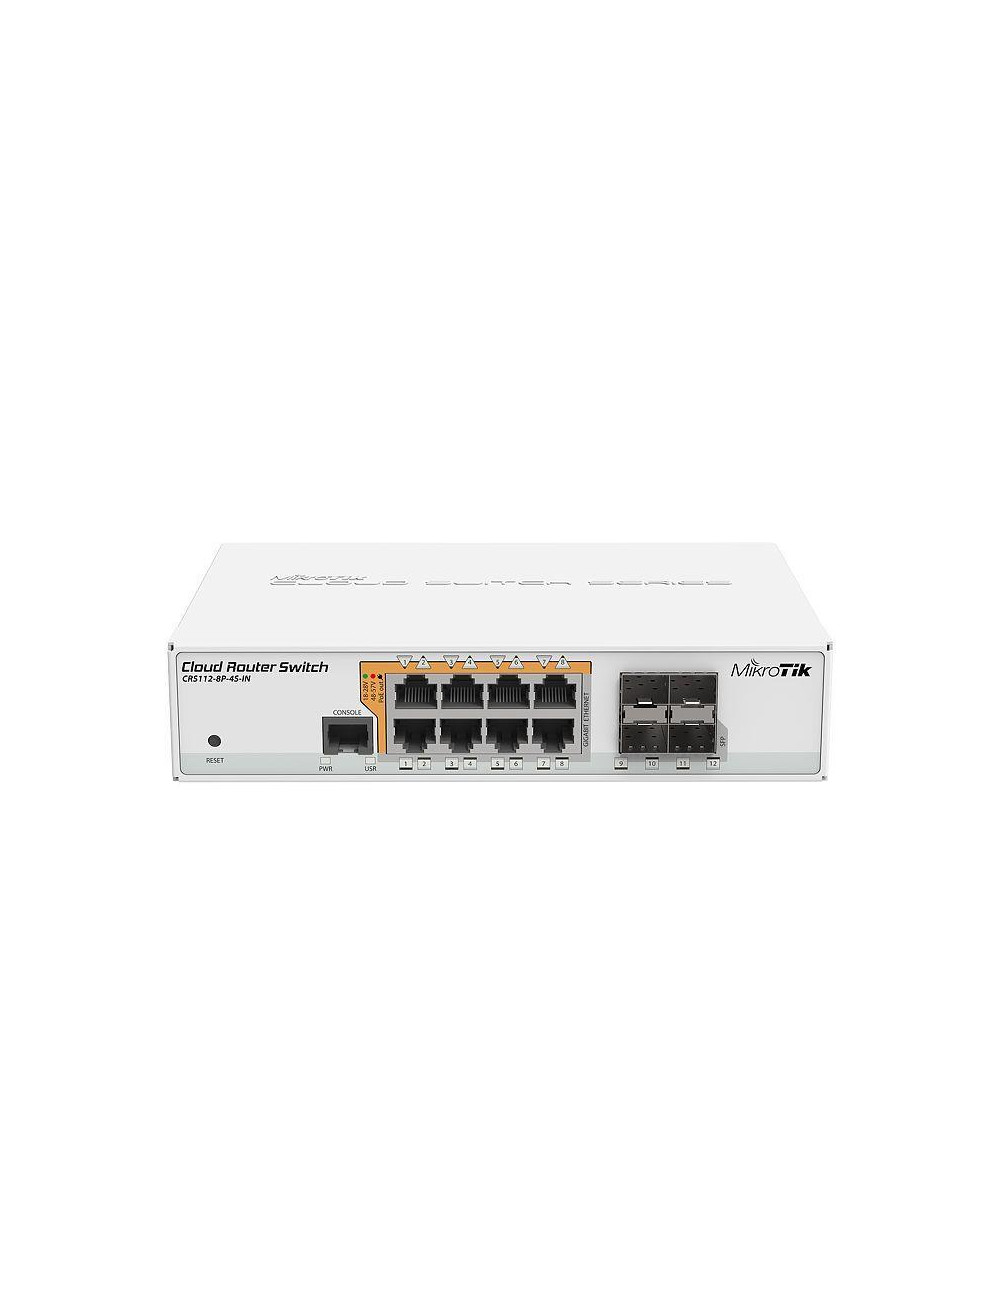 Switch|MIKROTIK|8x10Base-T / 100Base-TX / 1000Base-T|4xSFP|1xConsole|CRS112-8P-4S-IN